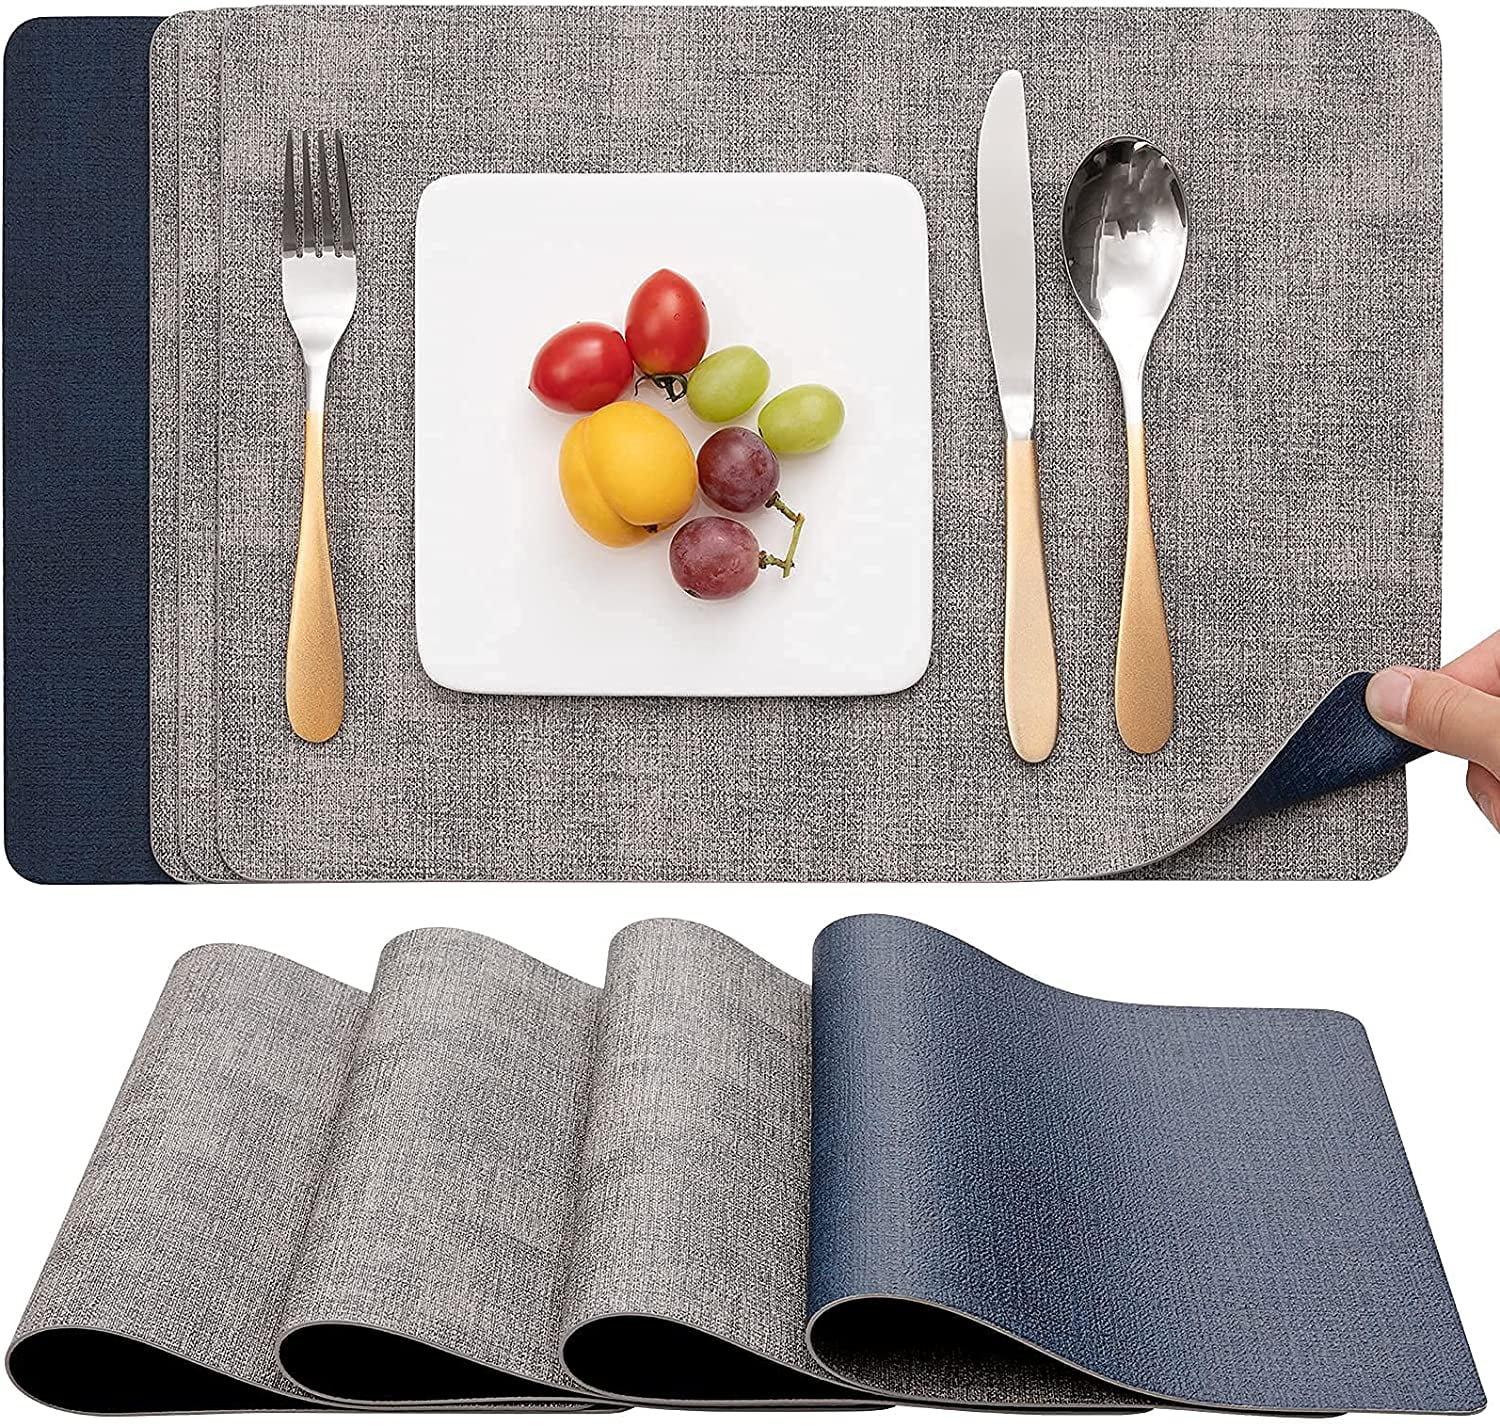 PU Leather Placemats Waterproof 4*Wipeable Table Mats Rectangular Easy Clean Non Slip Place Mats for Home Kitchen Dining Table Dinner 